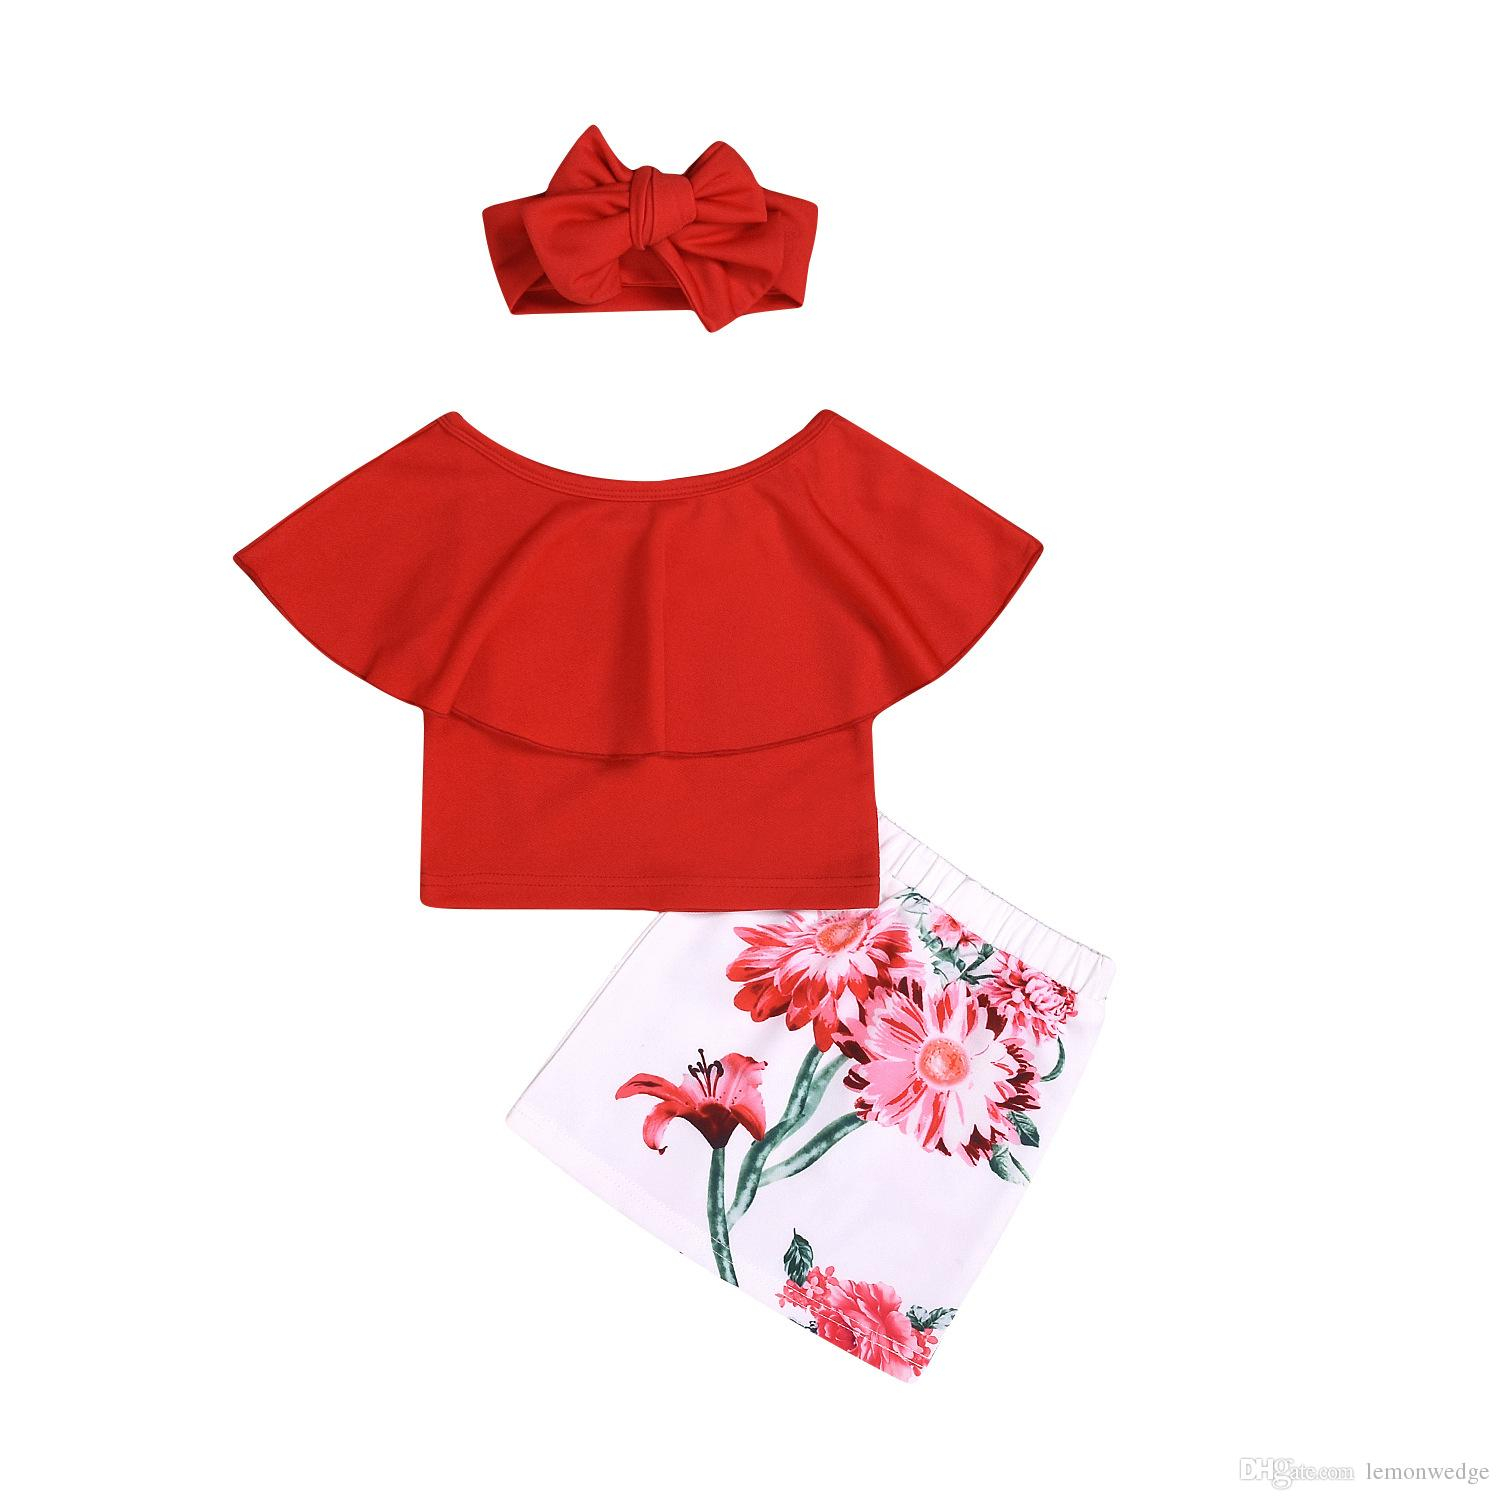 Origami For Kids Clothes Newborn Toddler Ba Girls Clothes Print Floral Skirts Headband Round Neck Top 3pcs Kids Outfit